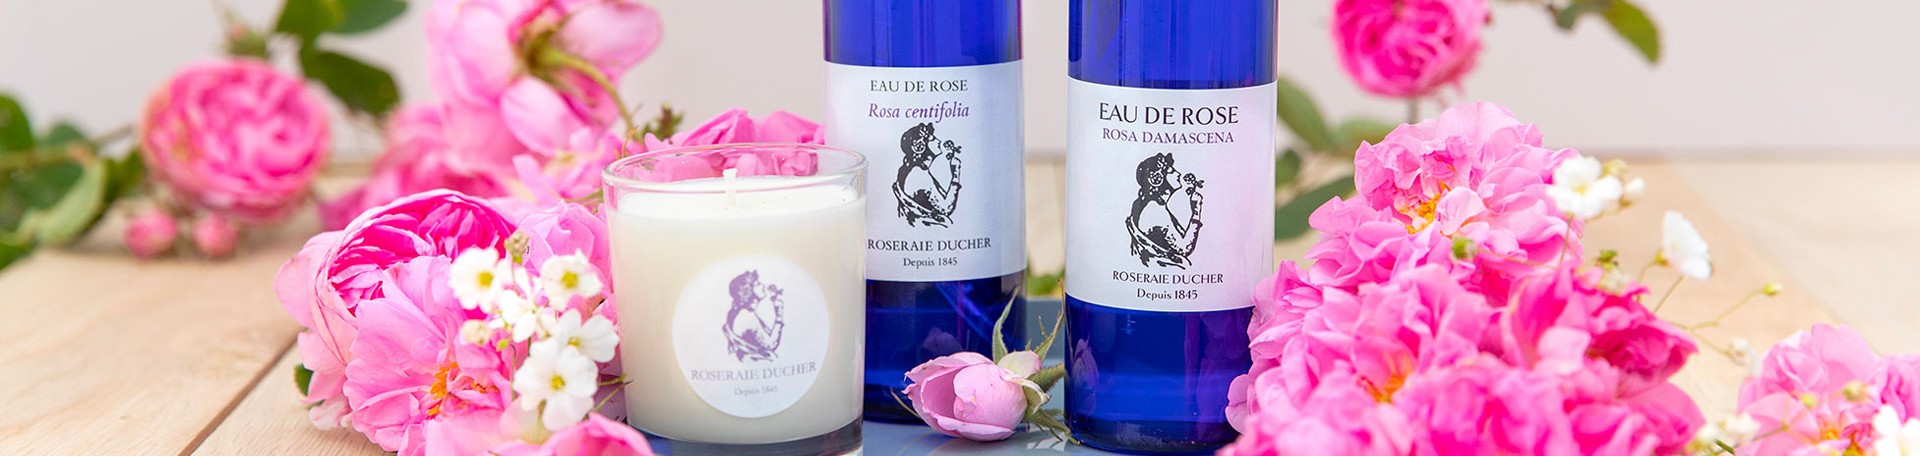 Products made from rose to the Rosarian Ducher